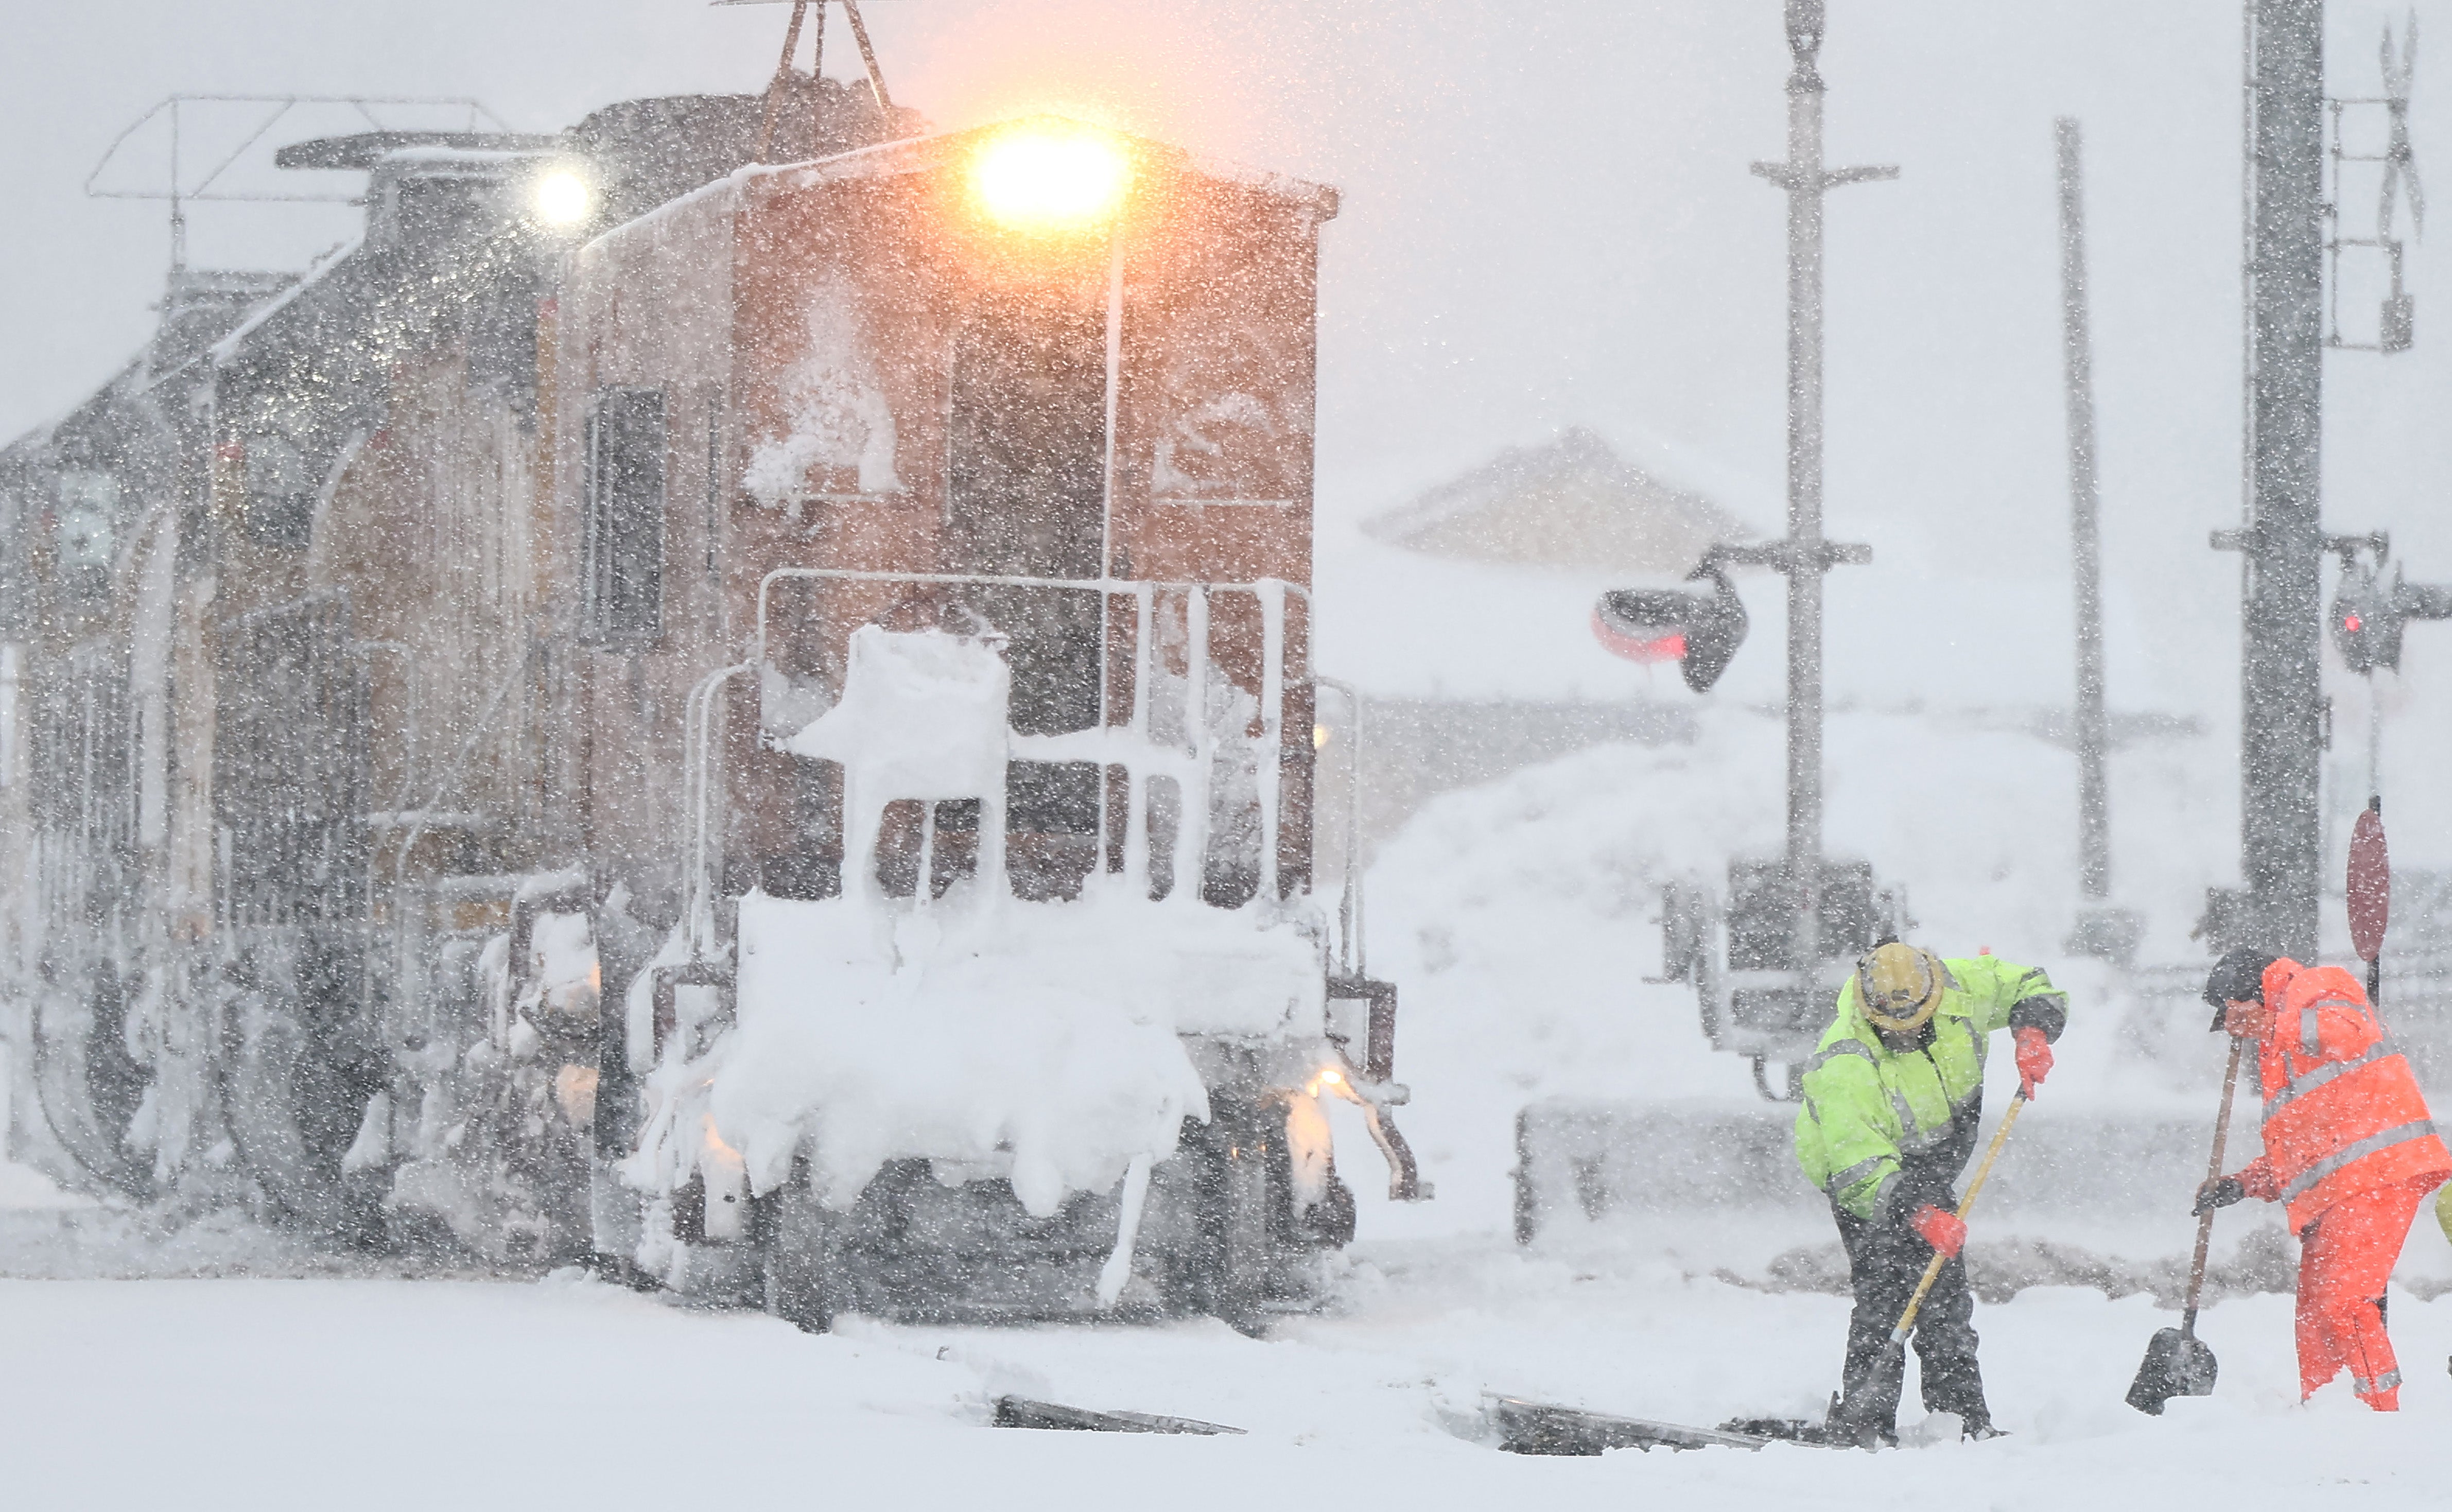 Workers clear train tracks as snow falls north of Lake Tahoe in the Sierra Nevada mountains during a powerful winter storm on March 01, 2024 in Truckee, California